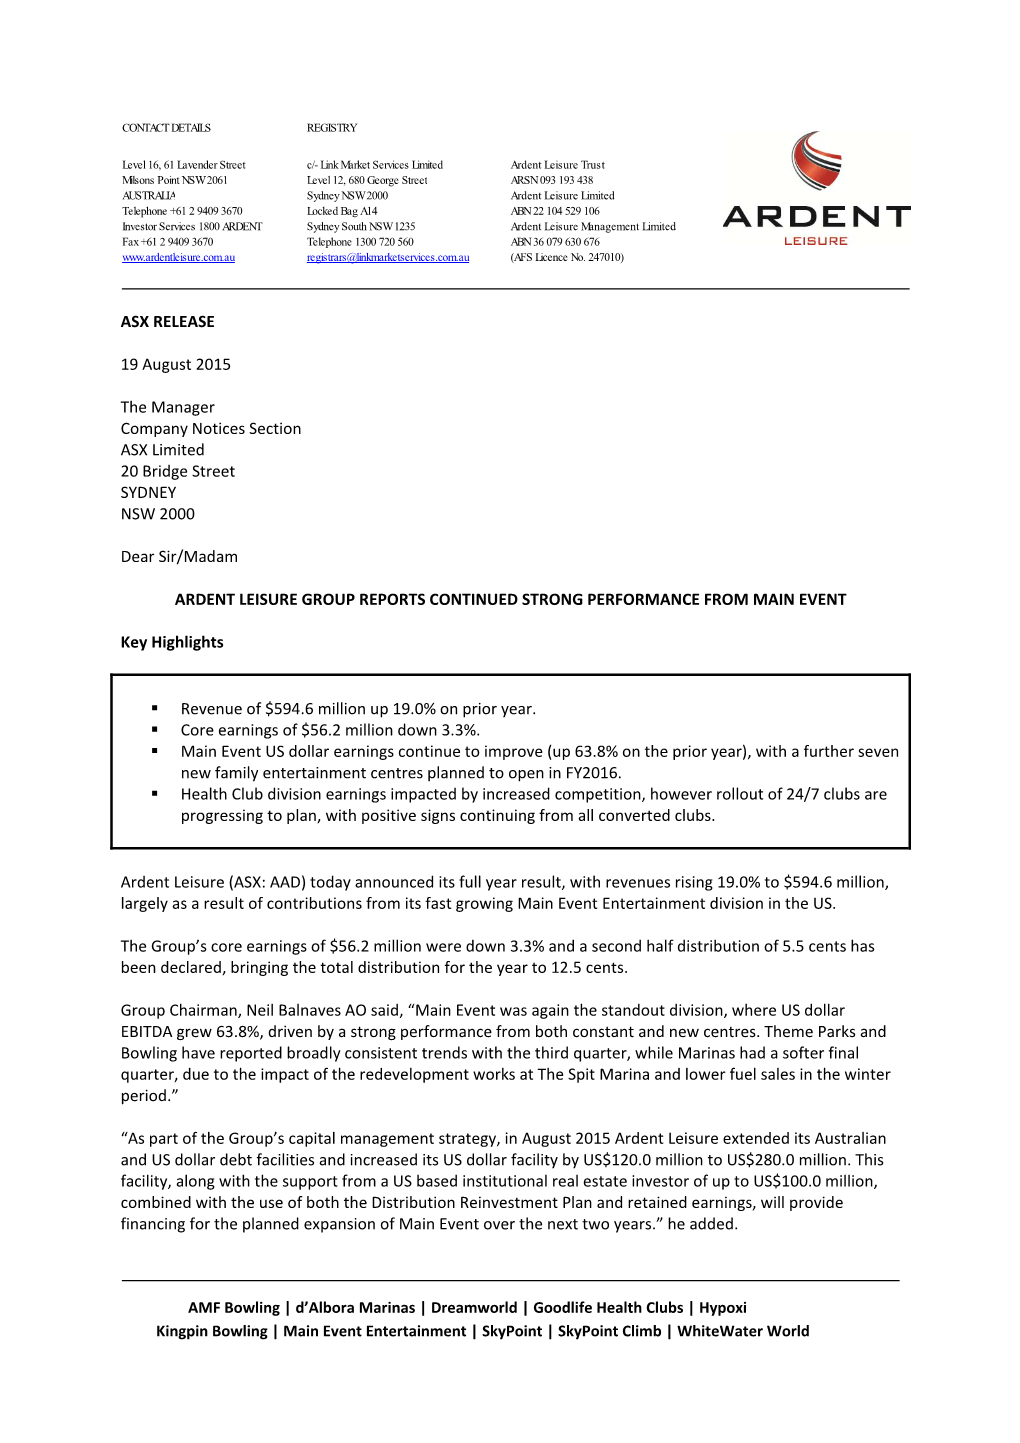 ASX RELEASE 19 August 2015 the Manager Company Notices Section